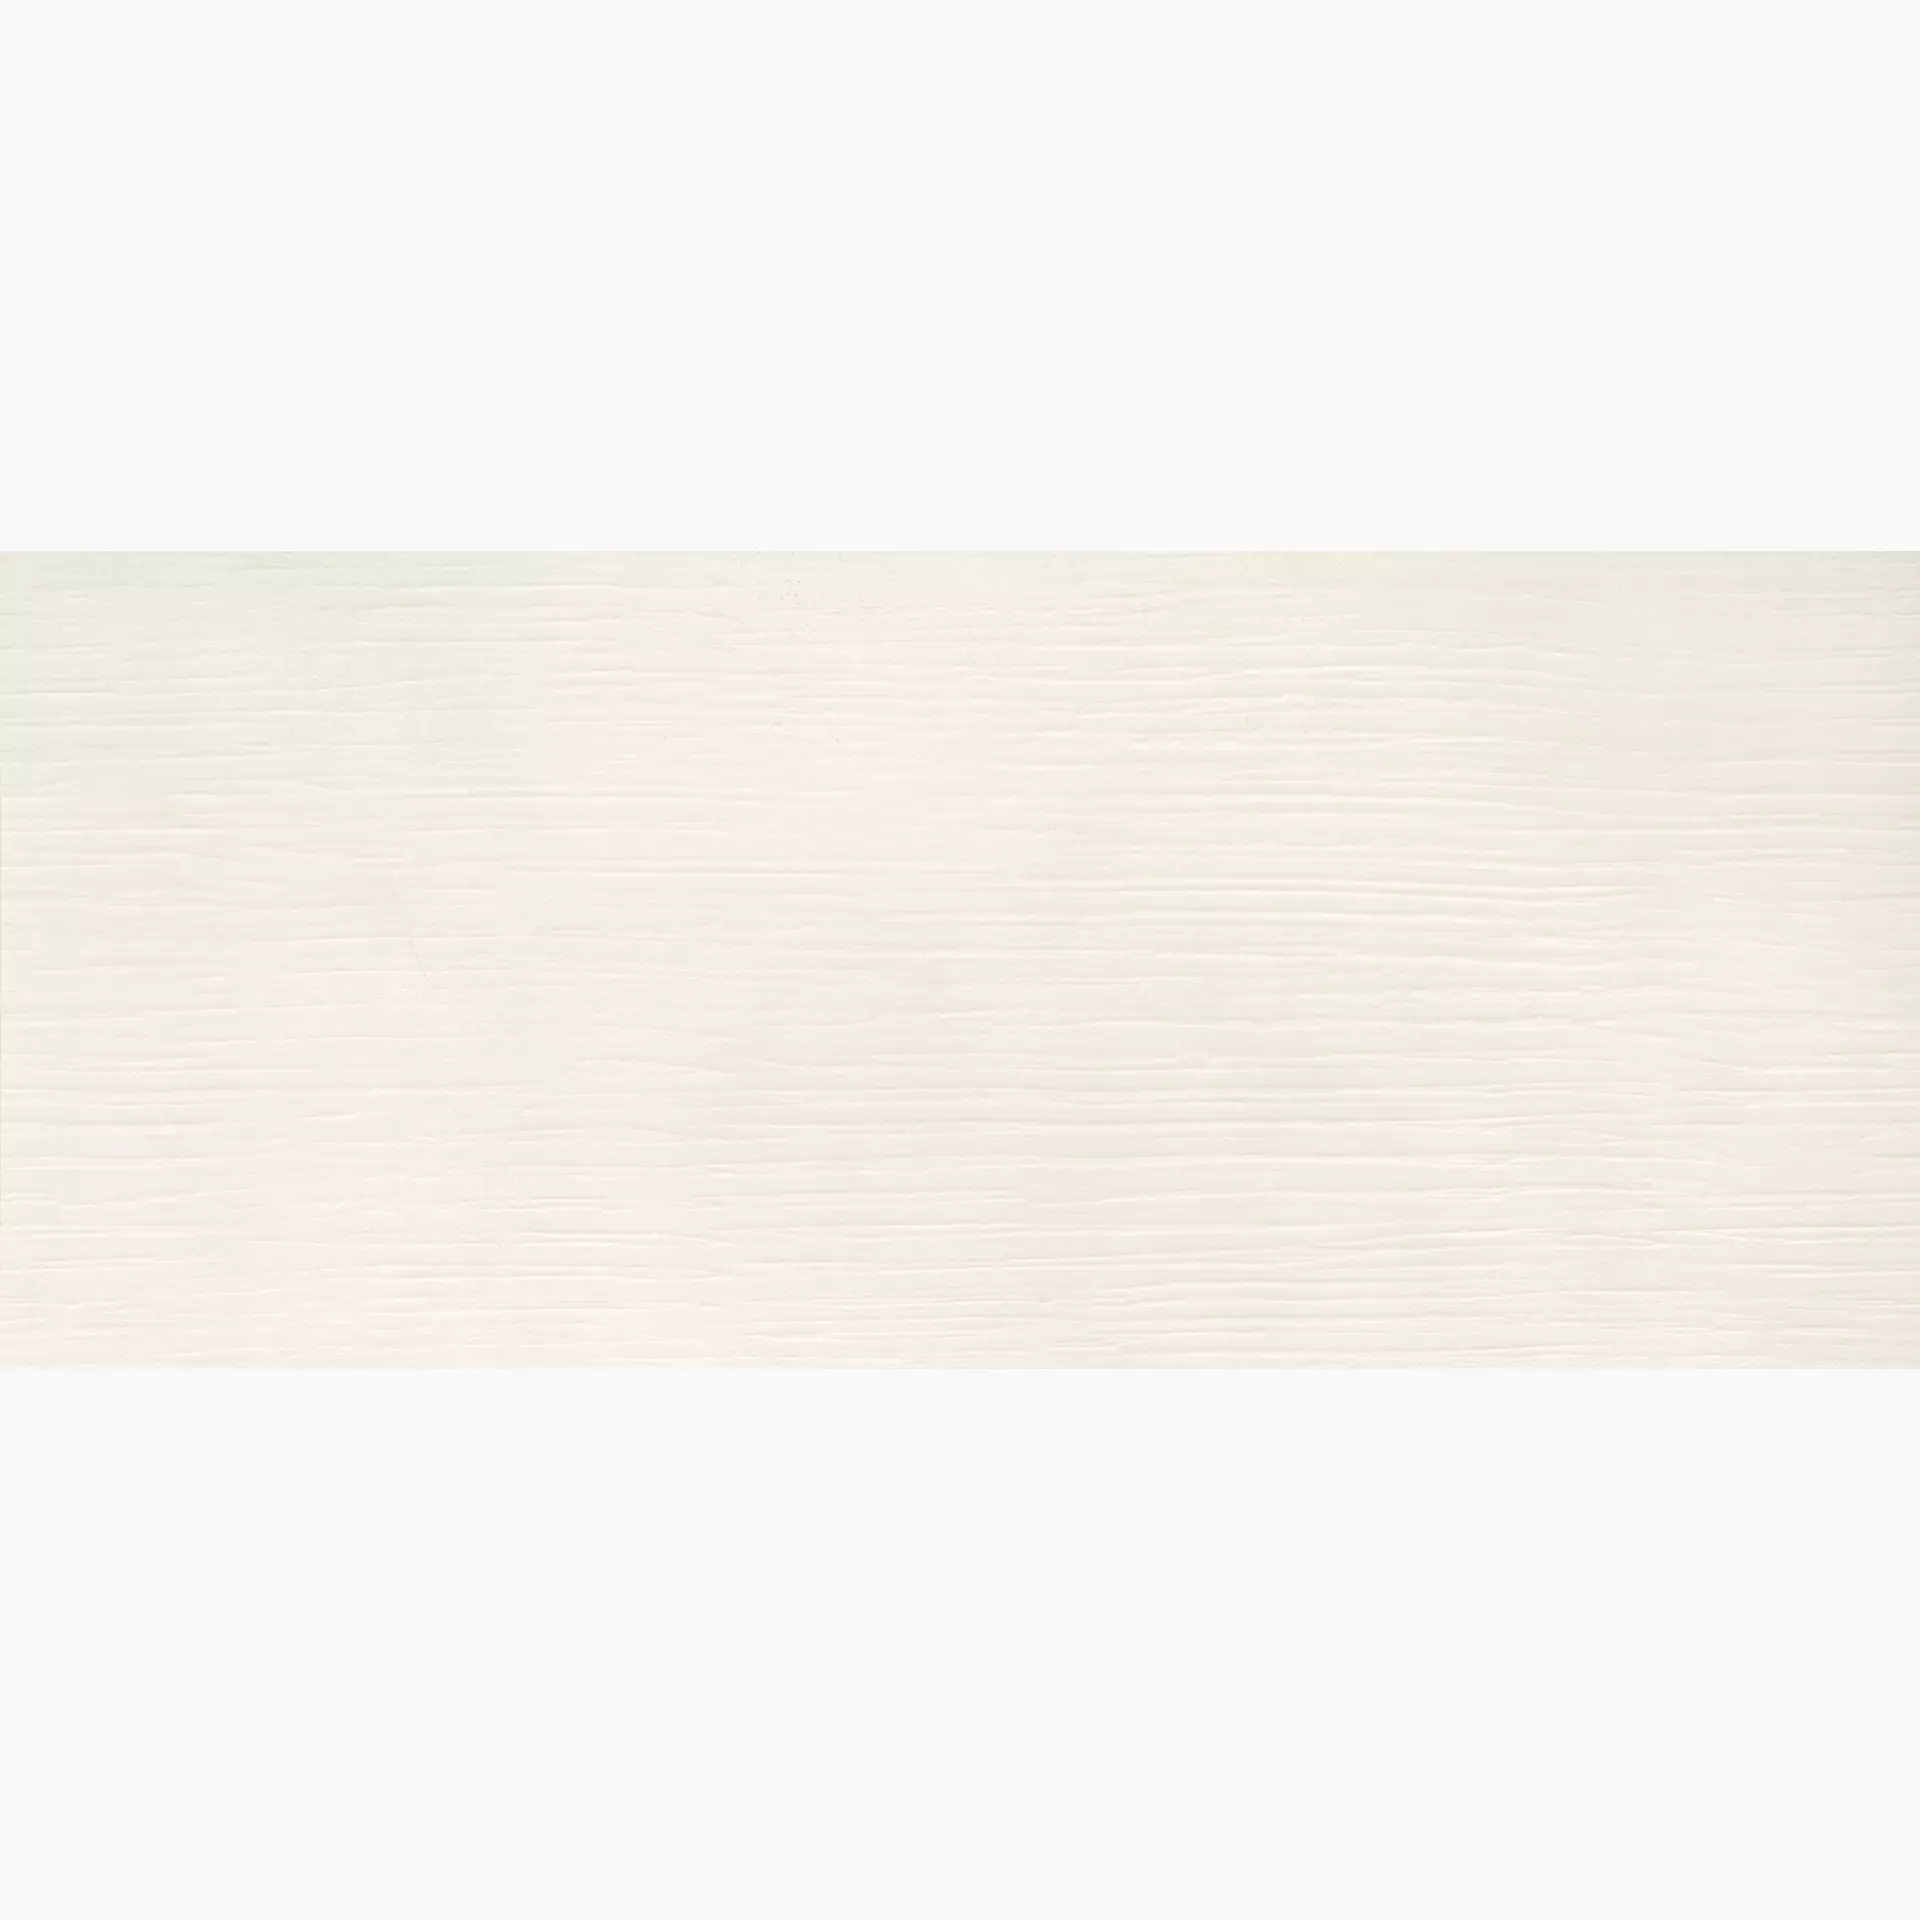 Supergres Colovers Wall Love White Brush Struttura Love White Brush LWBR struktur 50x120cm Brush rektifiziert 8,5mm